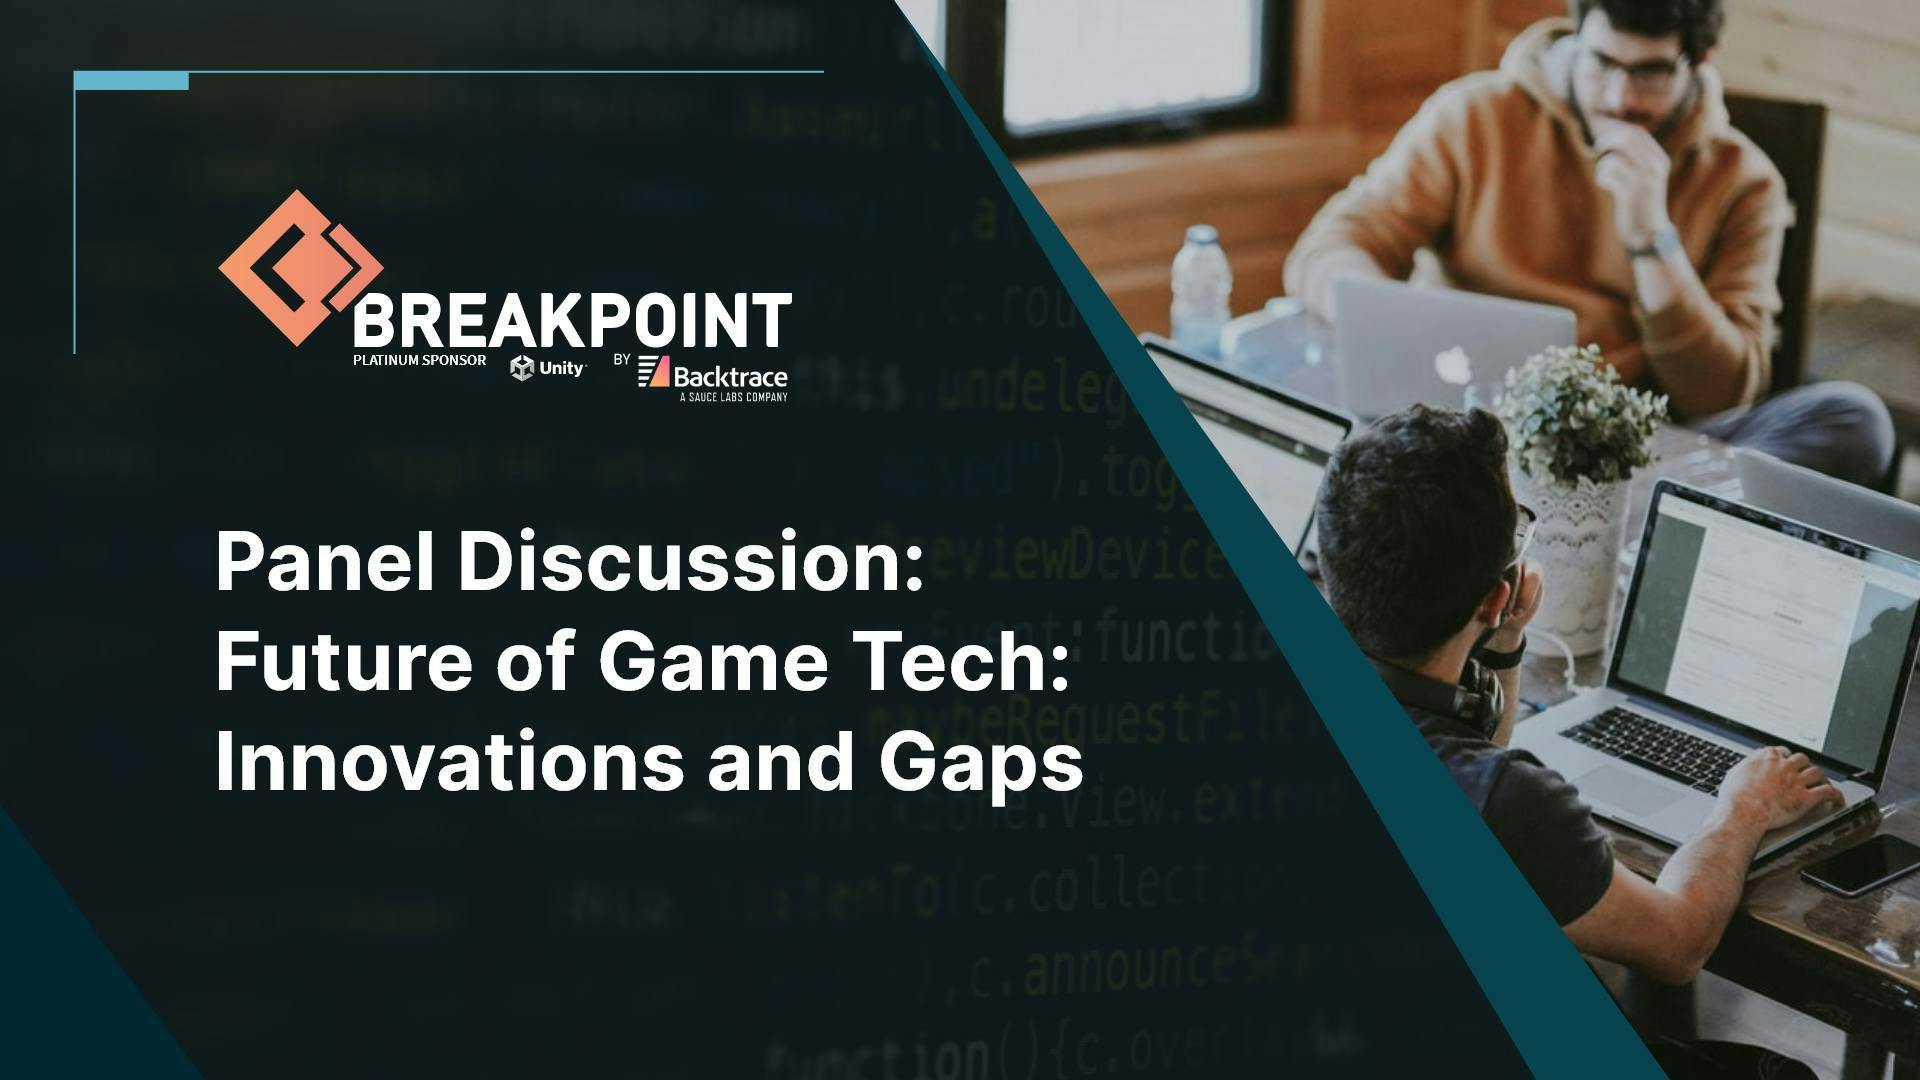 Breakpoint - Panel Discussion: Future of Game Tech Innovations and Gaps